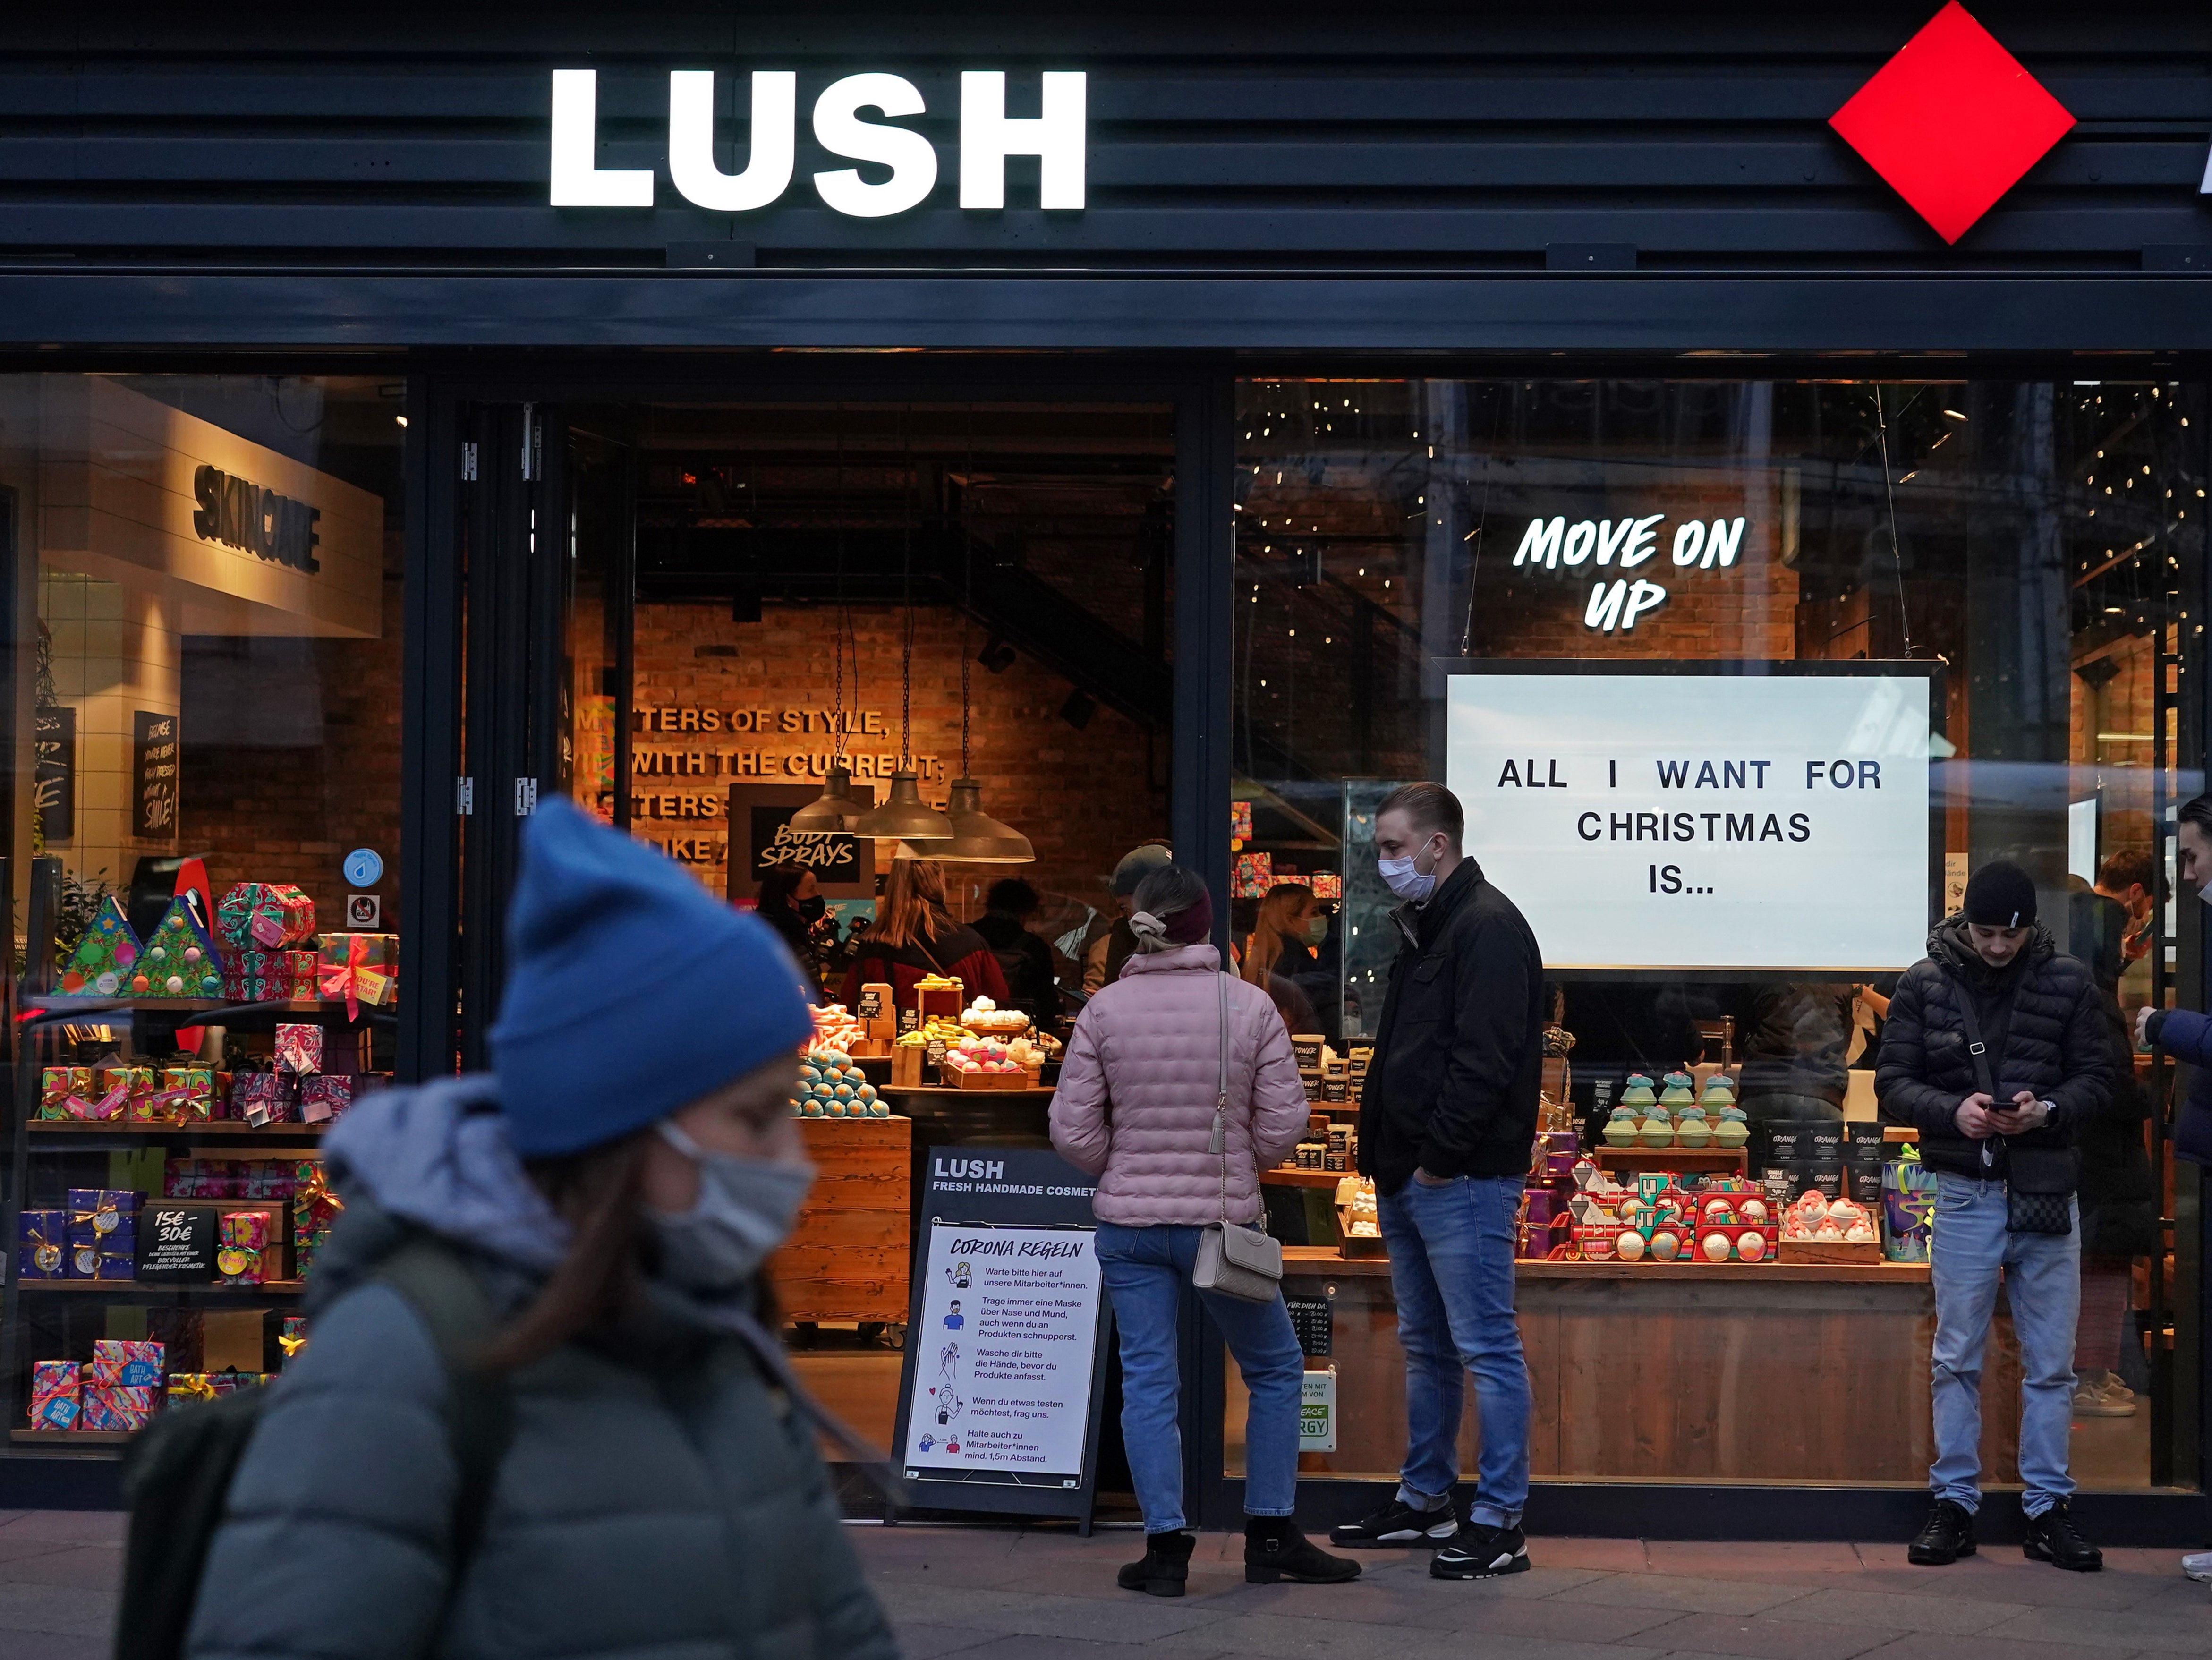 A lush store in Berlin, Germany